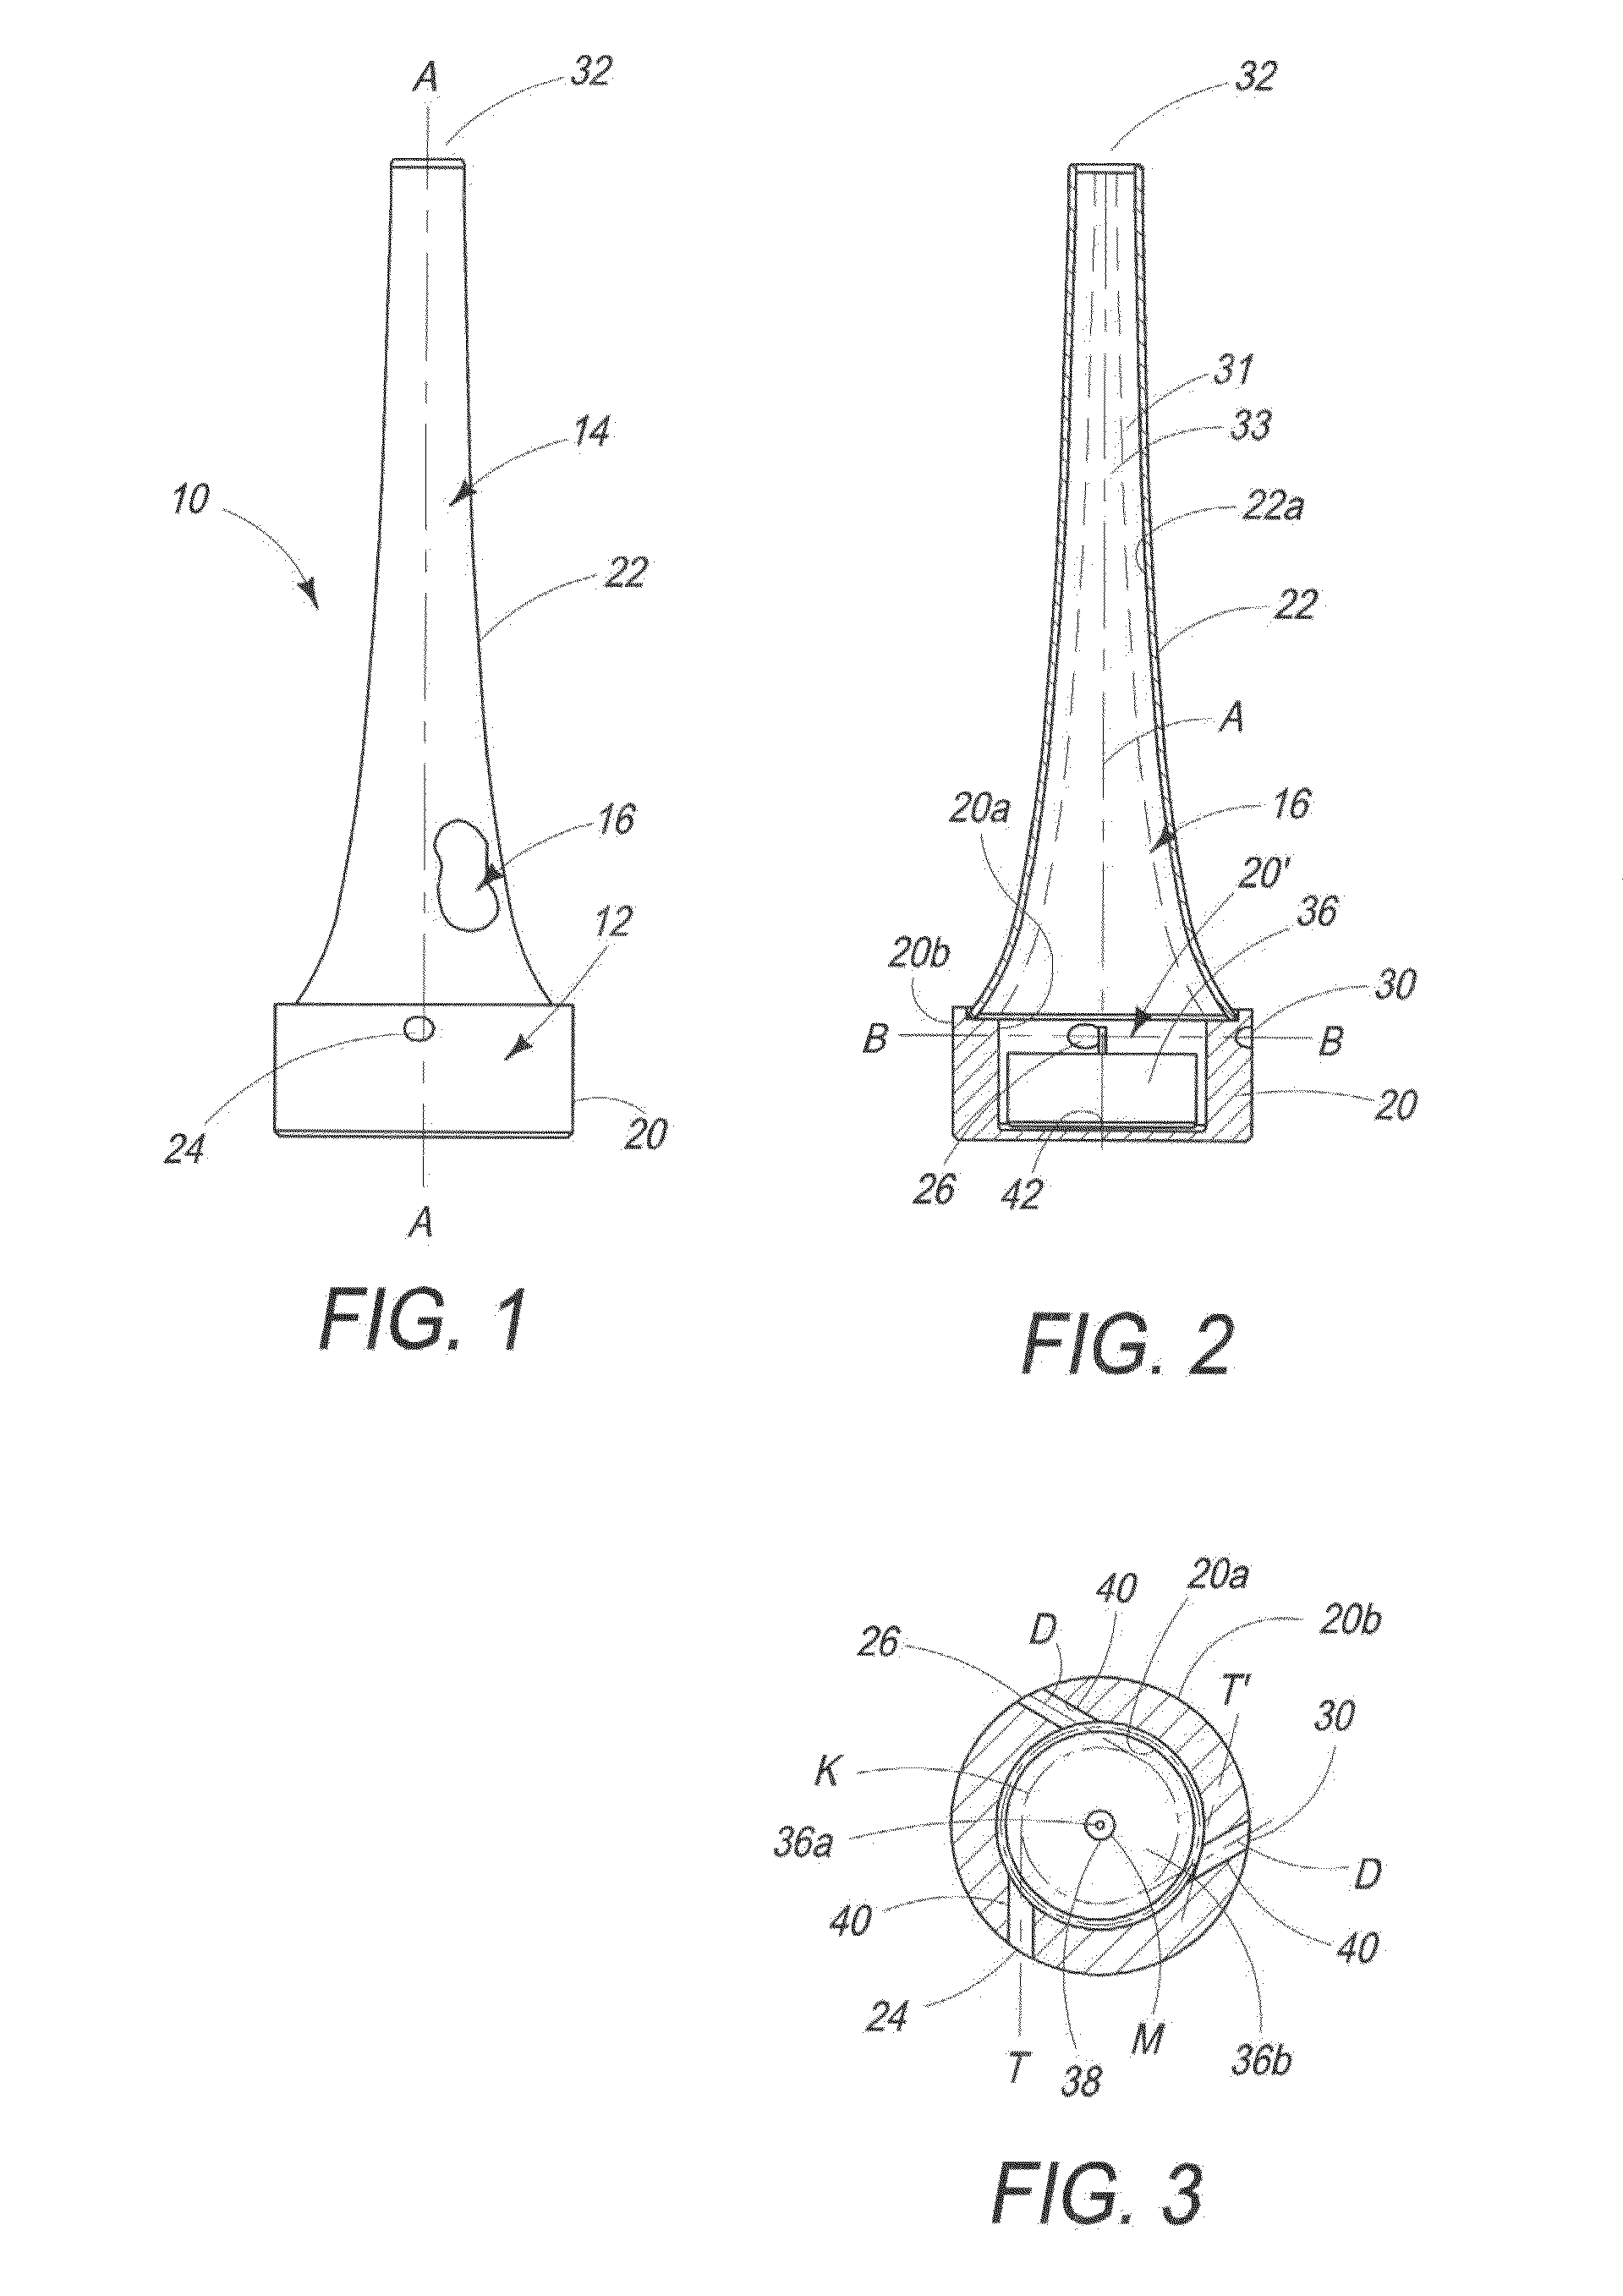 Apparatus and method for rotating a fire, a flame, a smoke plume, or for circulating heat